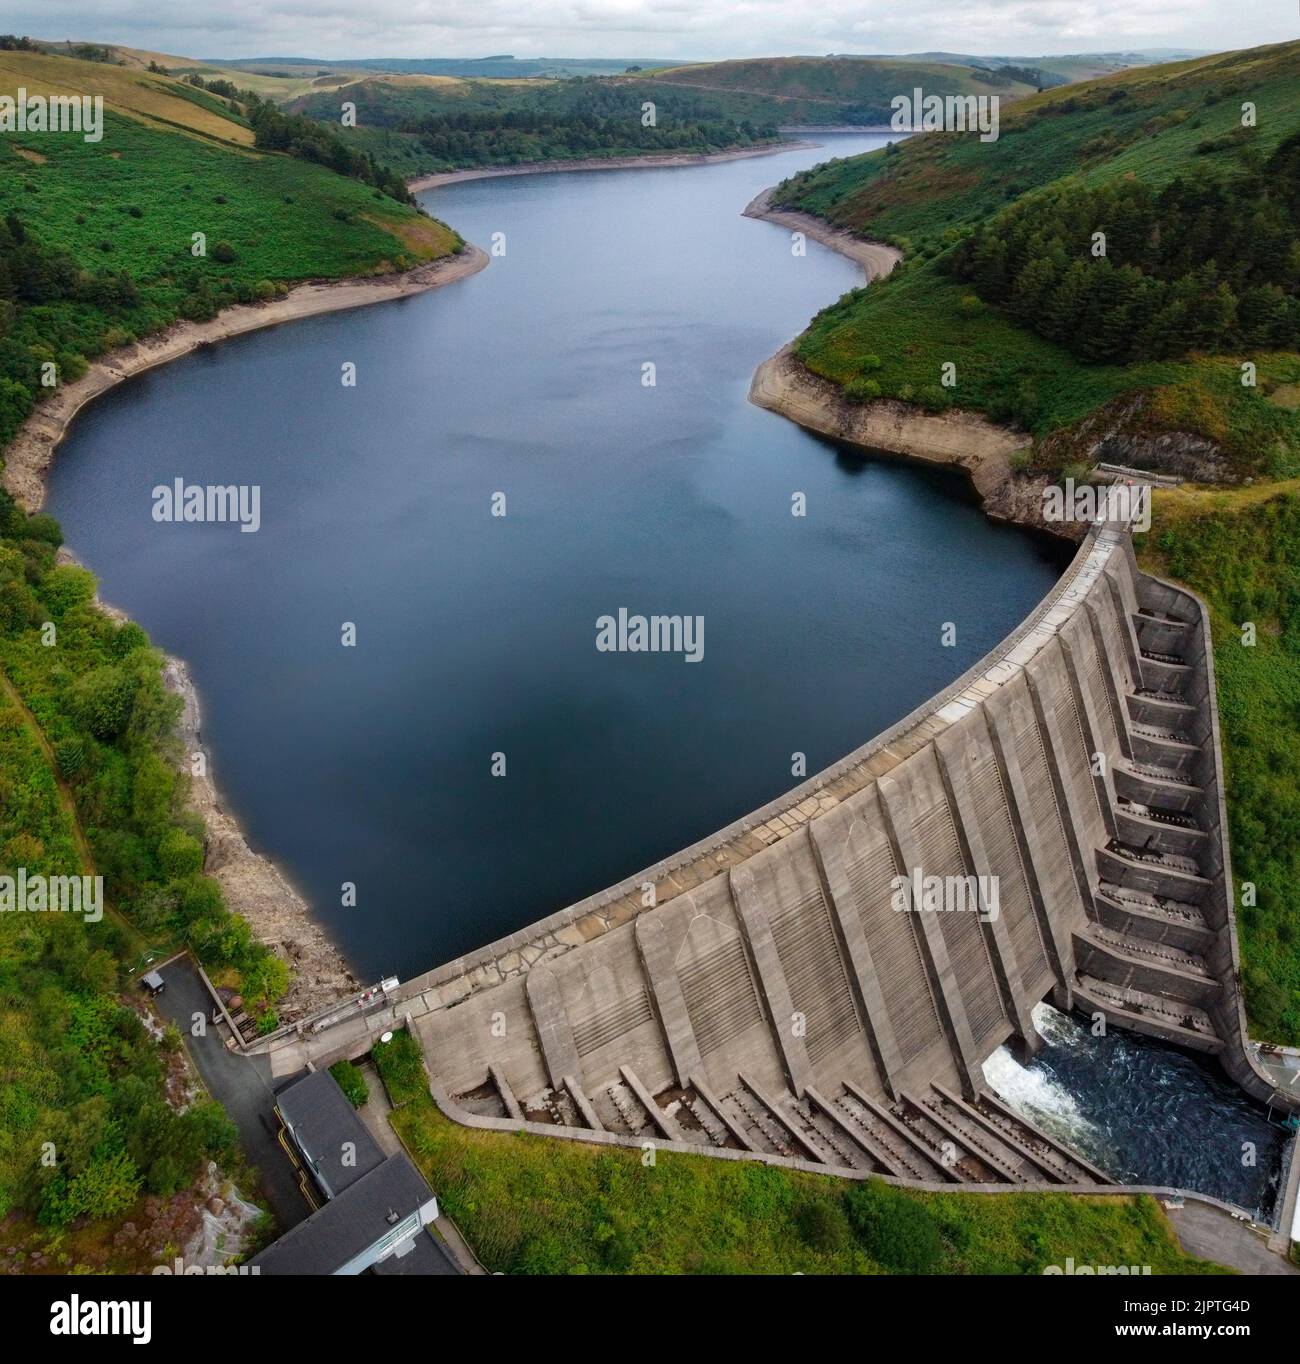 Aerial view of Llyn Clywedog Dam near Llanidloes in the Powis region of central Wales. Stock Photo